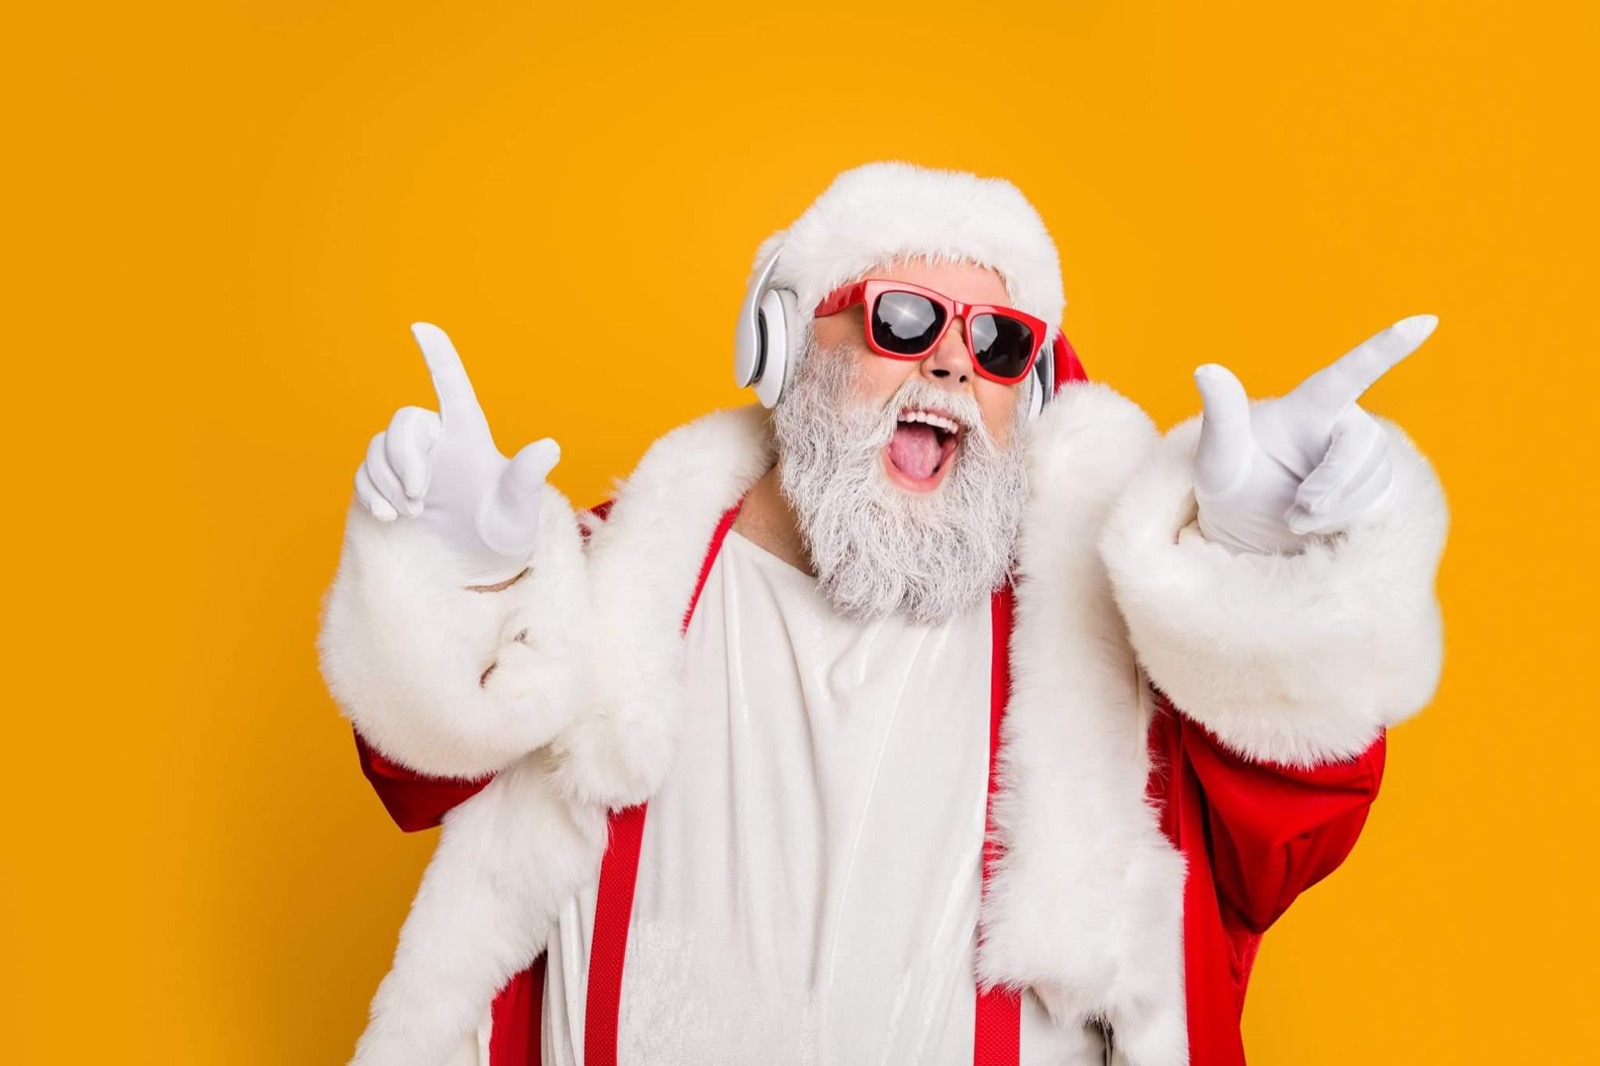 You got 11 out of 20! Tis the Season for Music! Can You Sleigh Our Ultimate Christmas Song Trivia Quiz?